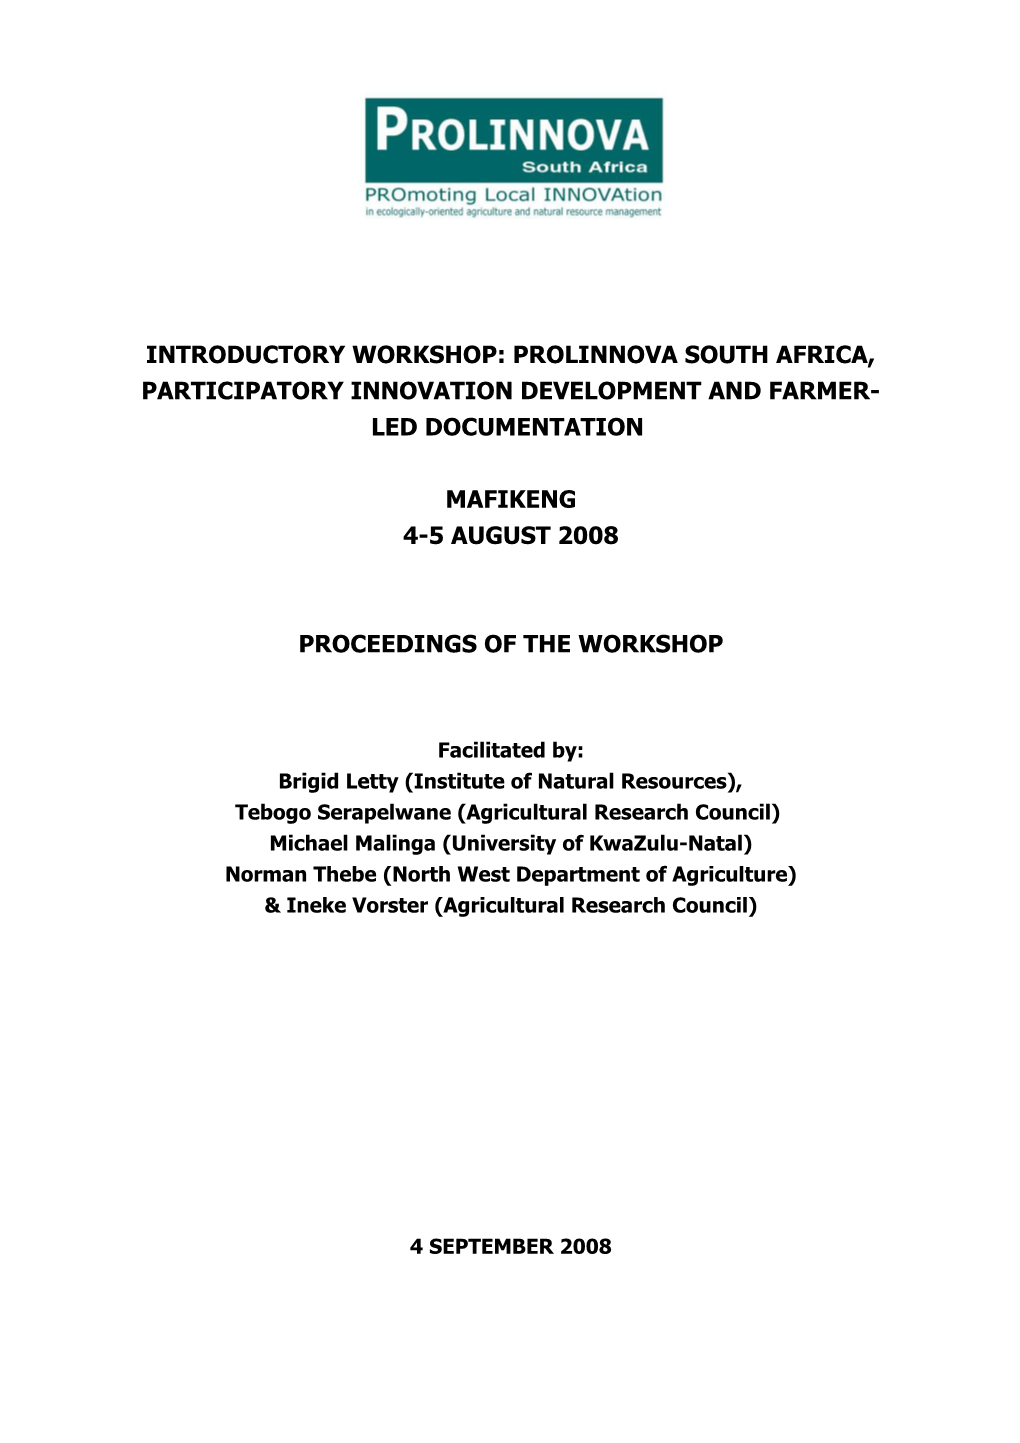 Introductory Workshop: Prolinnova South Africa, Participatory Innovation Development And